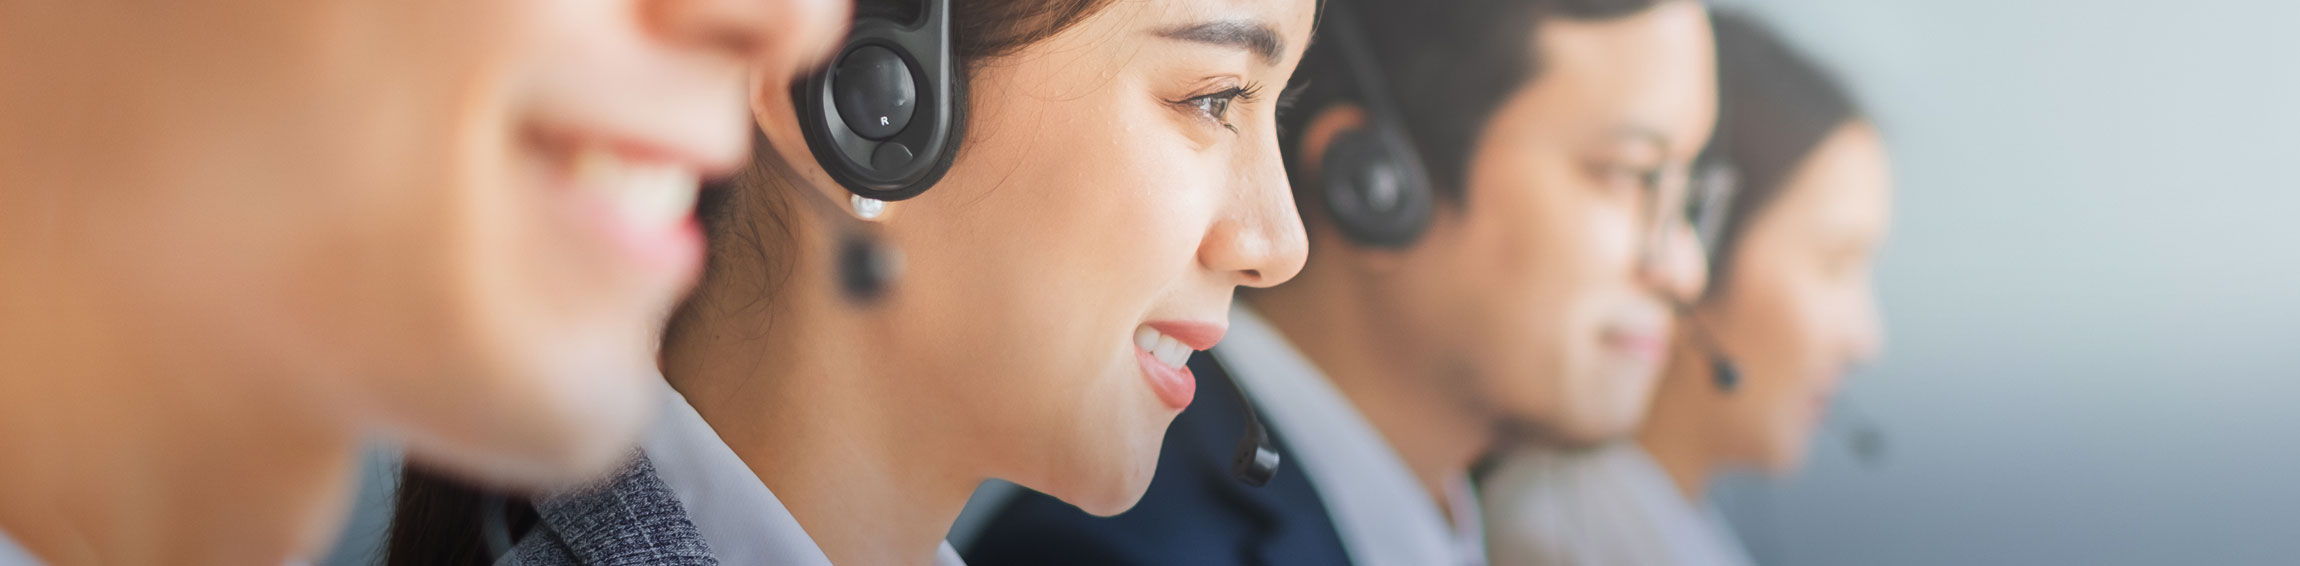 5 Things That Can Help Call Center Agents Be More Productive